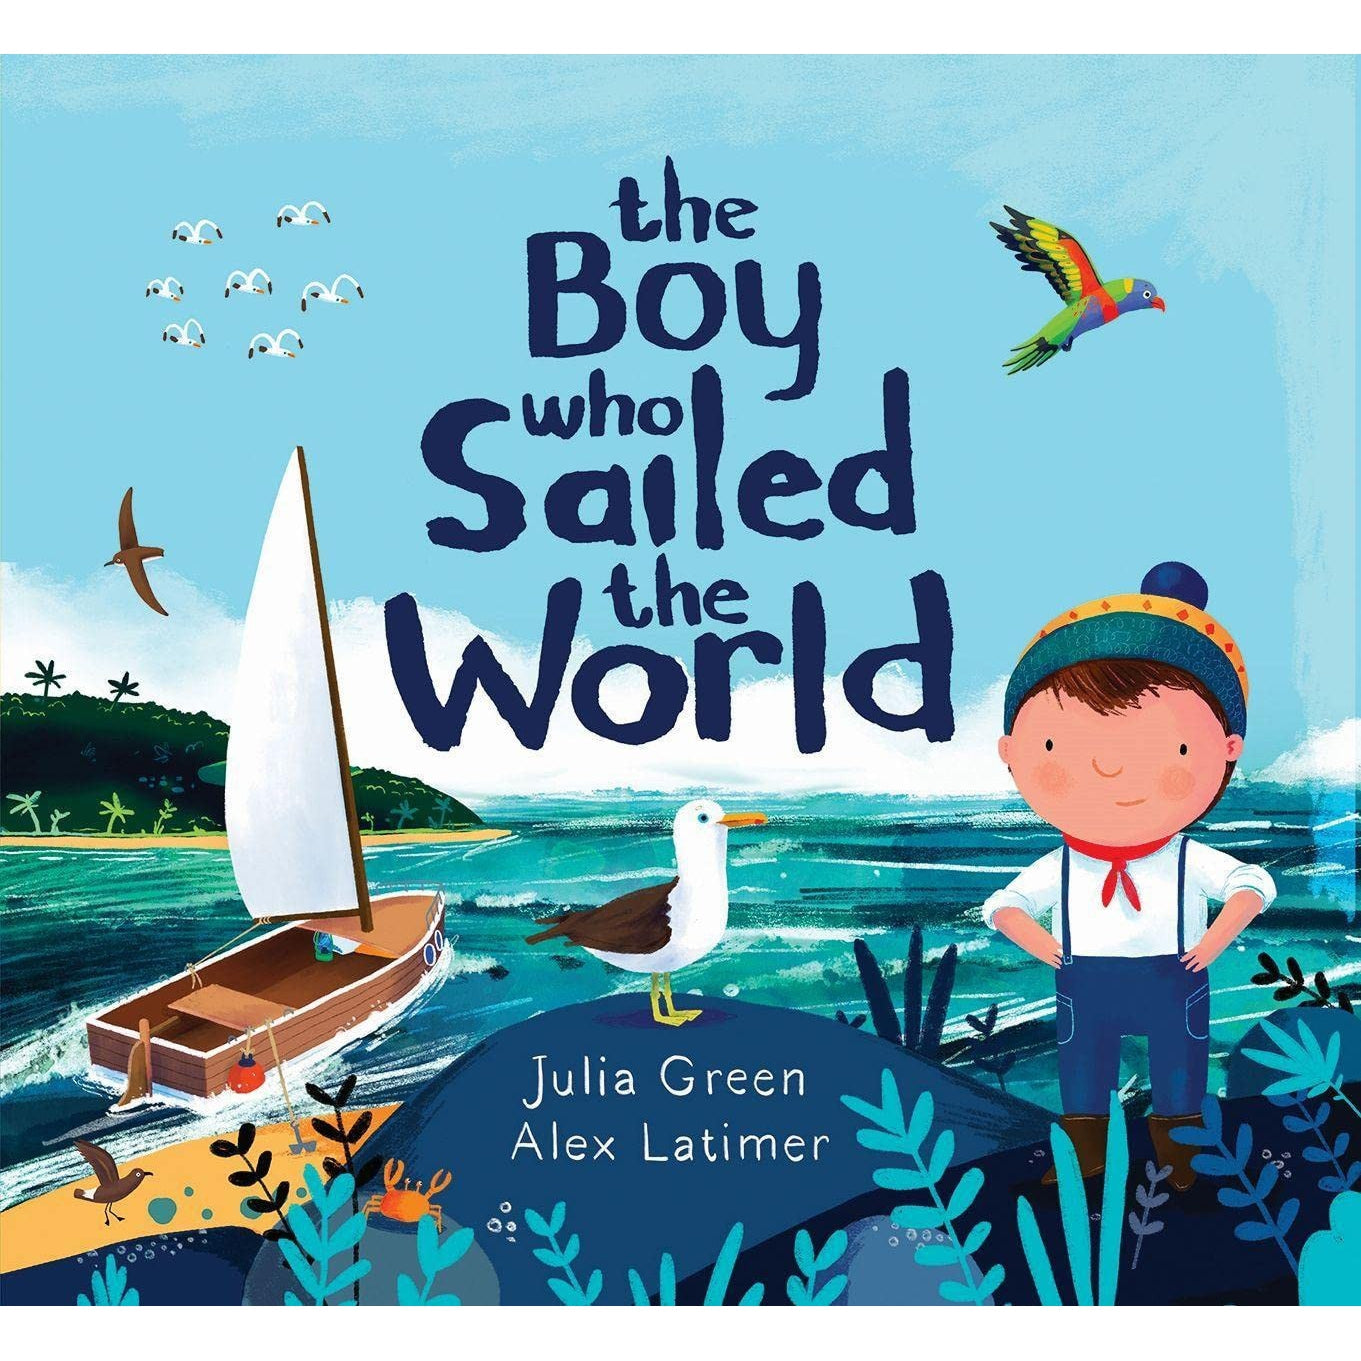 The Boy Who Sailed the World